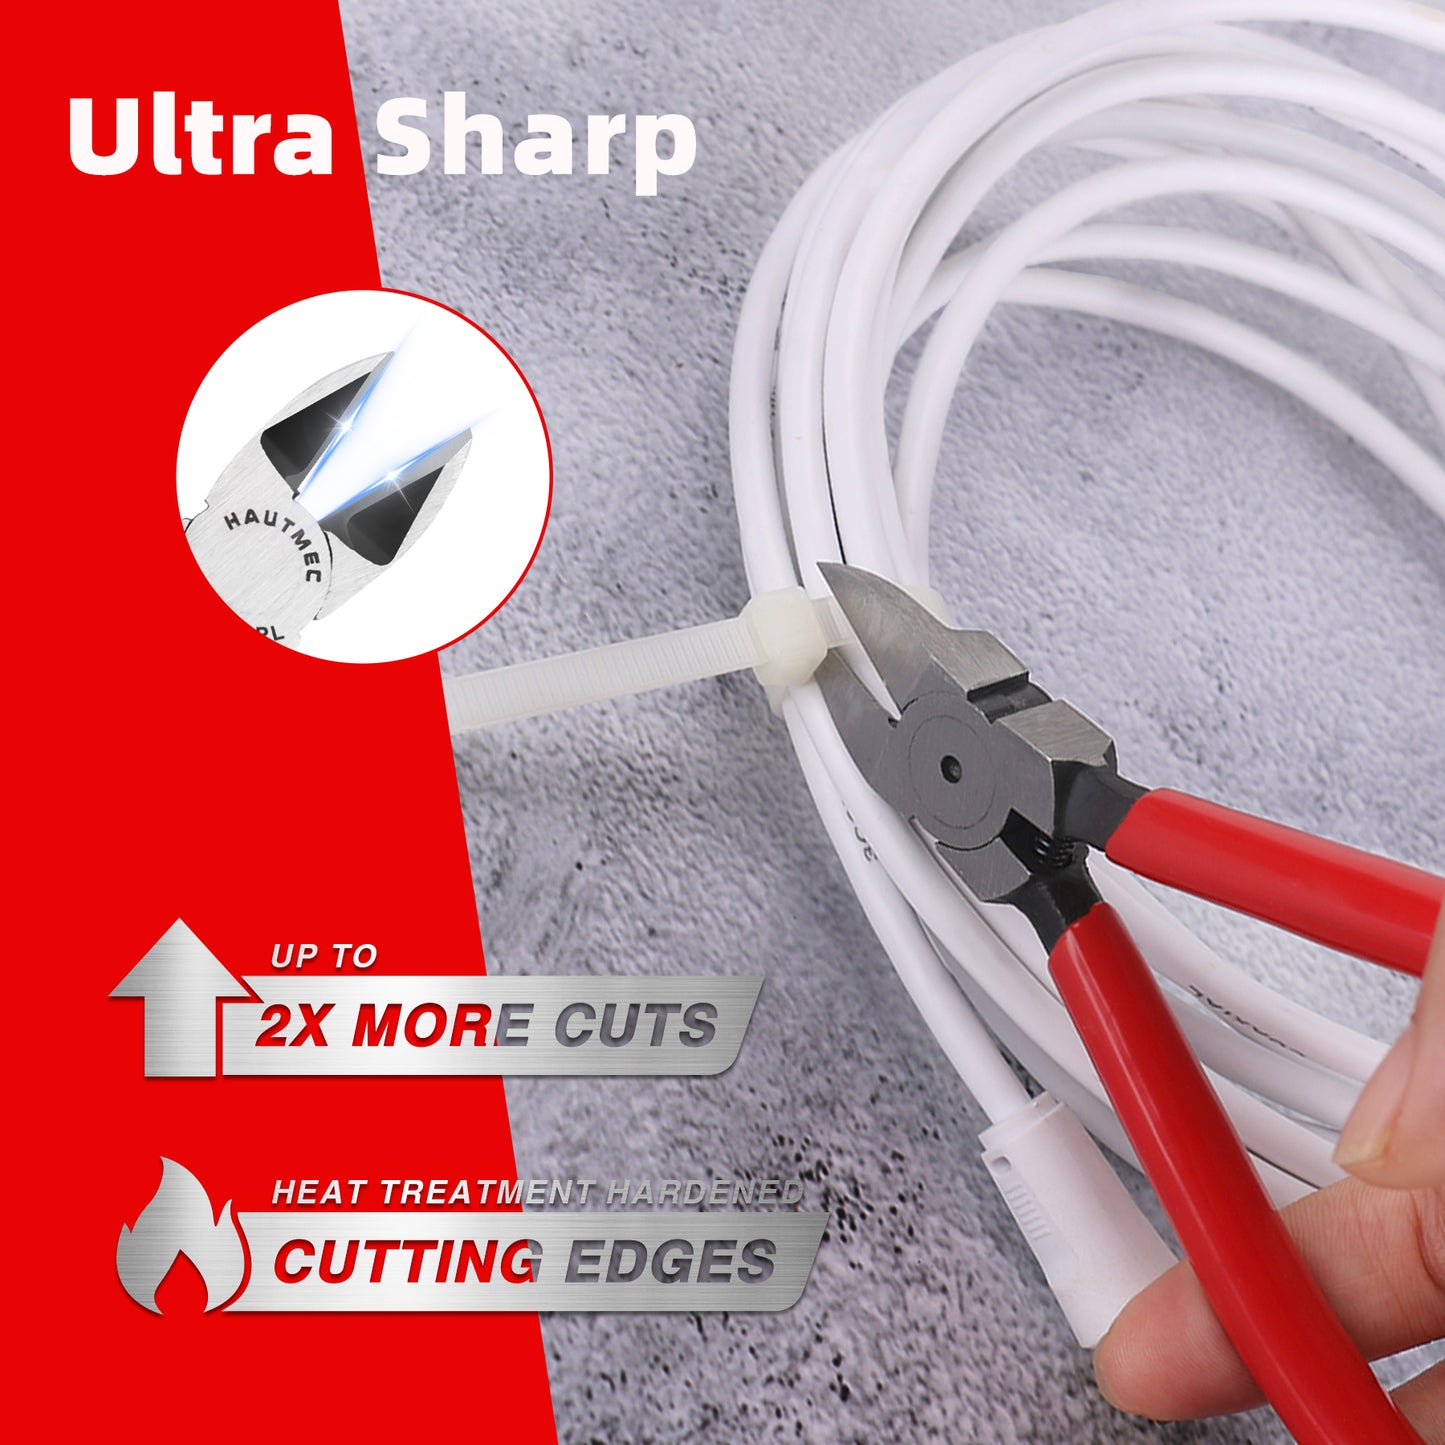 HAUTMEC 6" Flush Cut Pliers Ultra Sharp Wire Cutters 5PCS with Spring Loaded and Non-slip Grip, Ideal Wire Snips for Plastic, Soft Wire, Toy Model Kits, Jewelry Marking, Zip Ties, HT0318-5PC